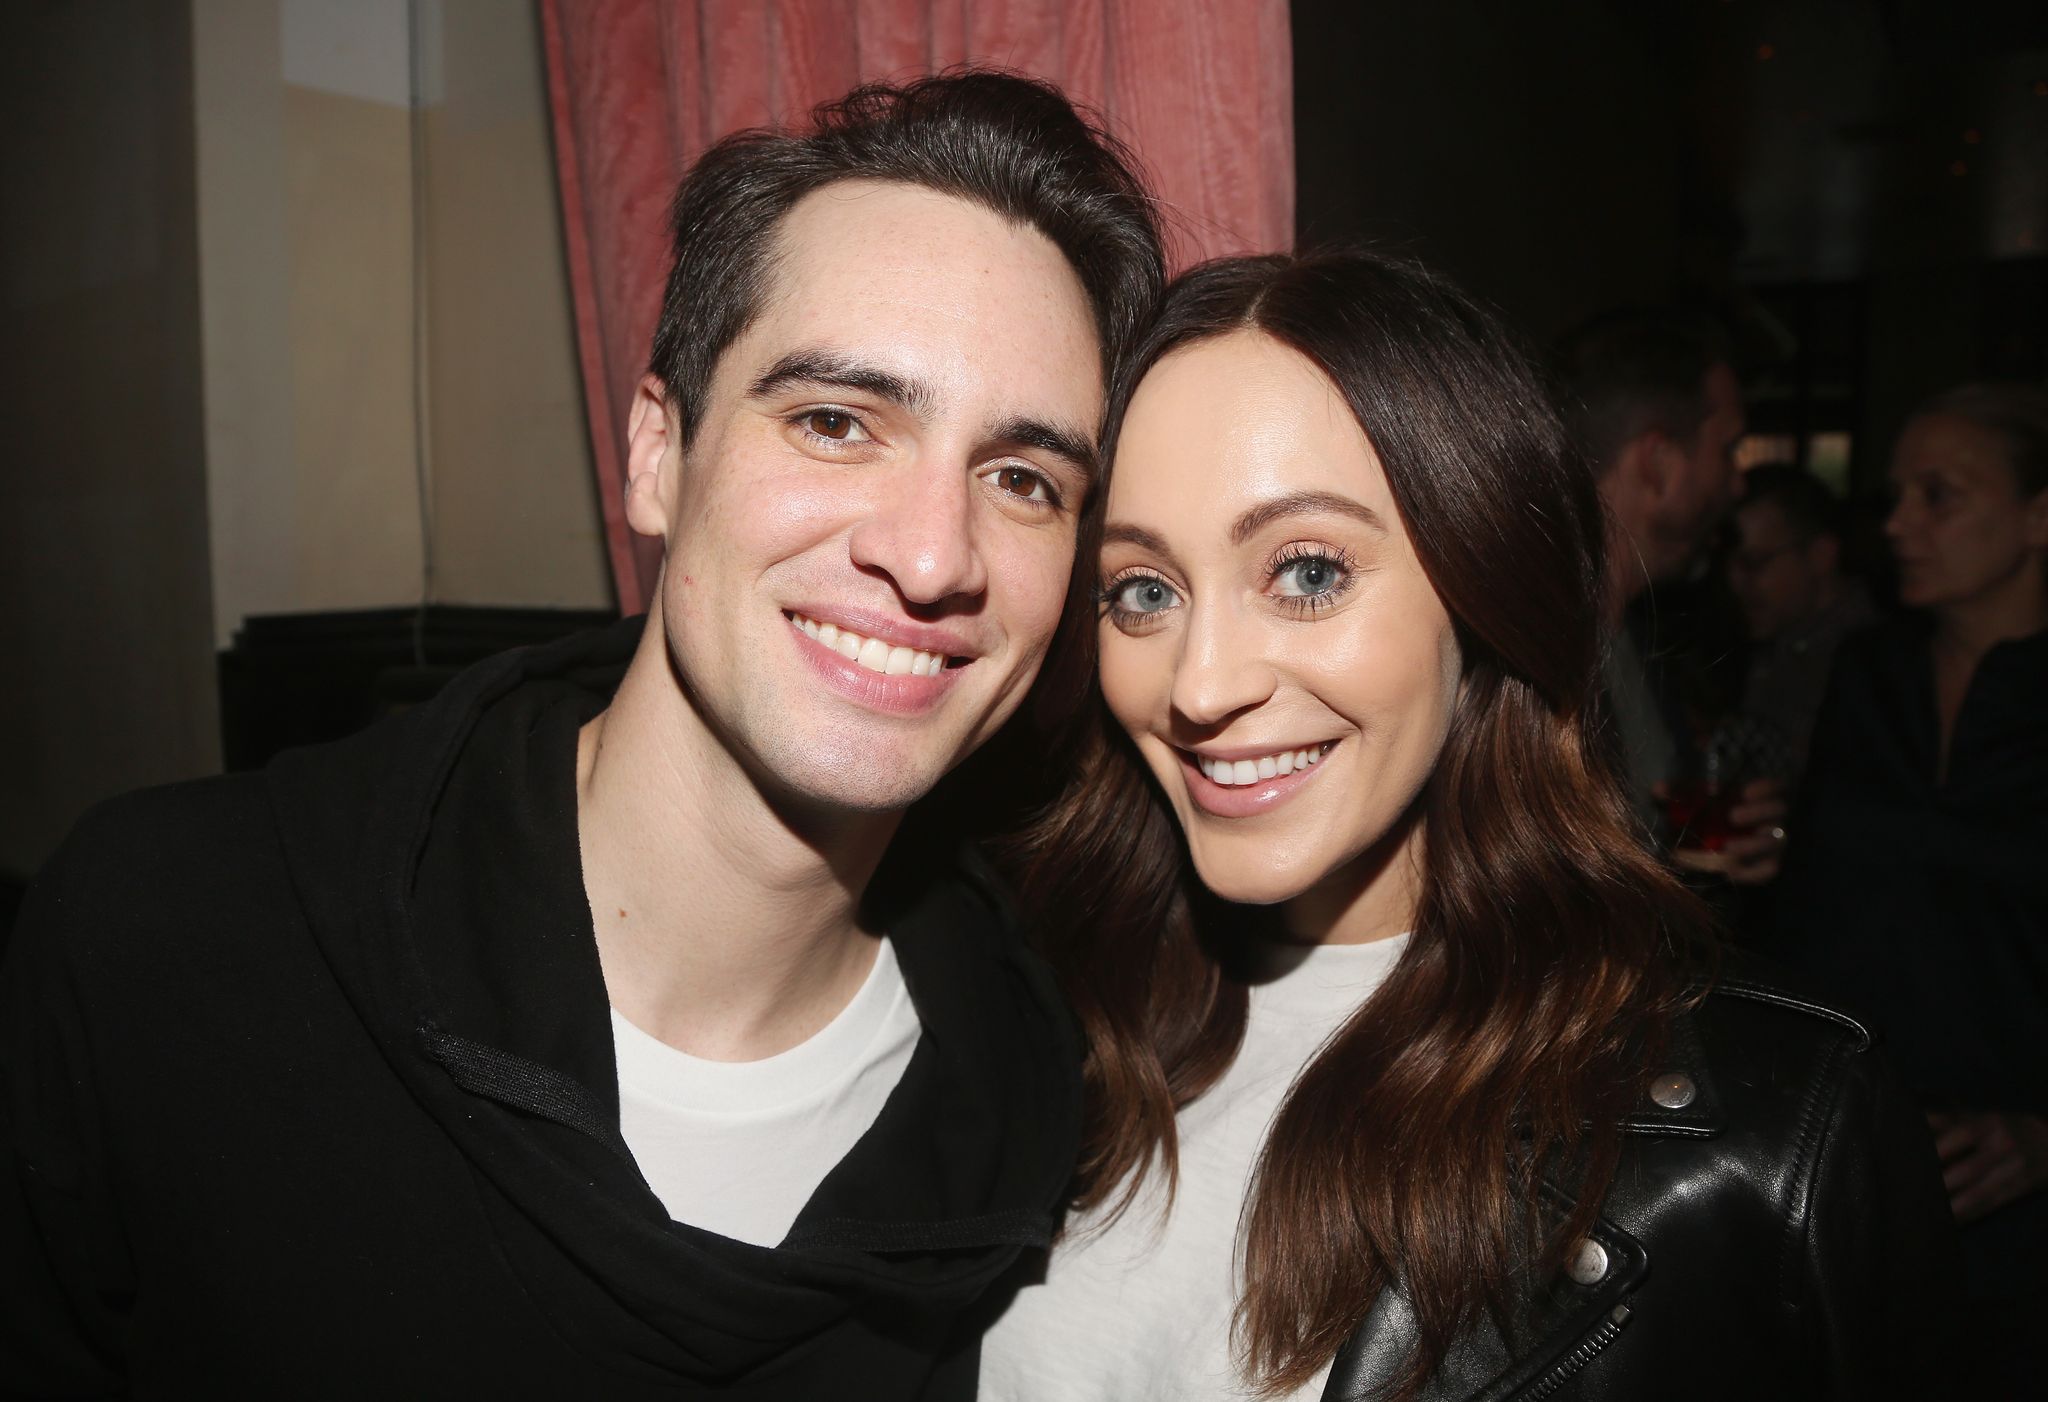 Brendon Urie and Sarah Orzechowski during the "Panic! at The Disco" frontman Brendon Urie's Opening Night in "Kinky Boots" at 44 1/2 Restaurant on June 4, 2017, in New York City. | Source: Getty Images